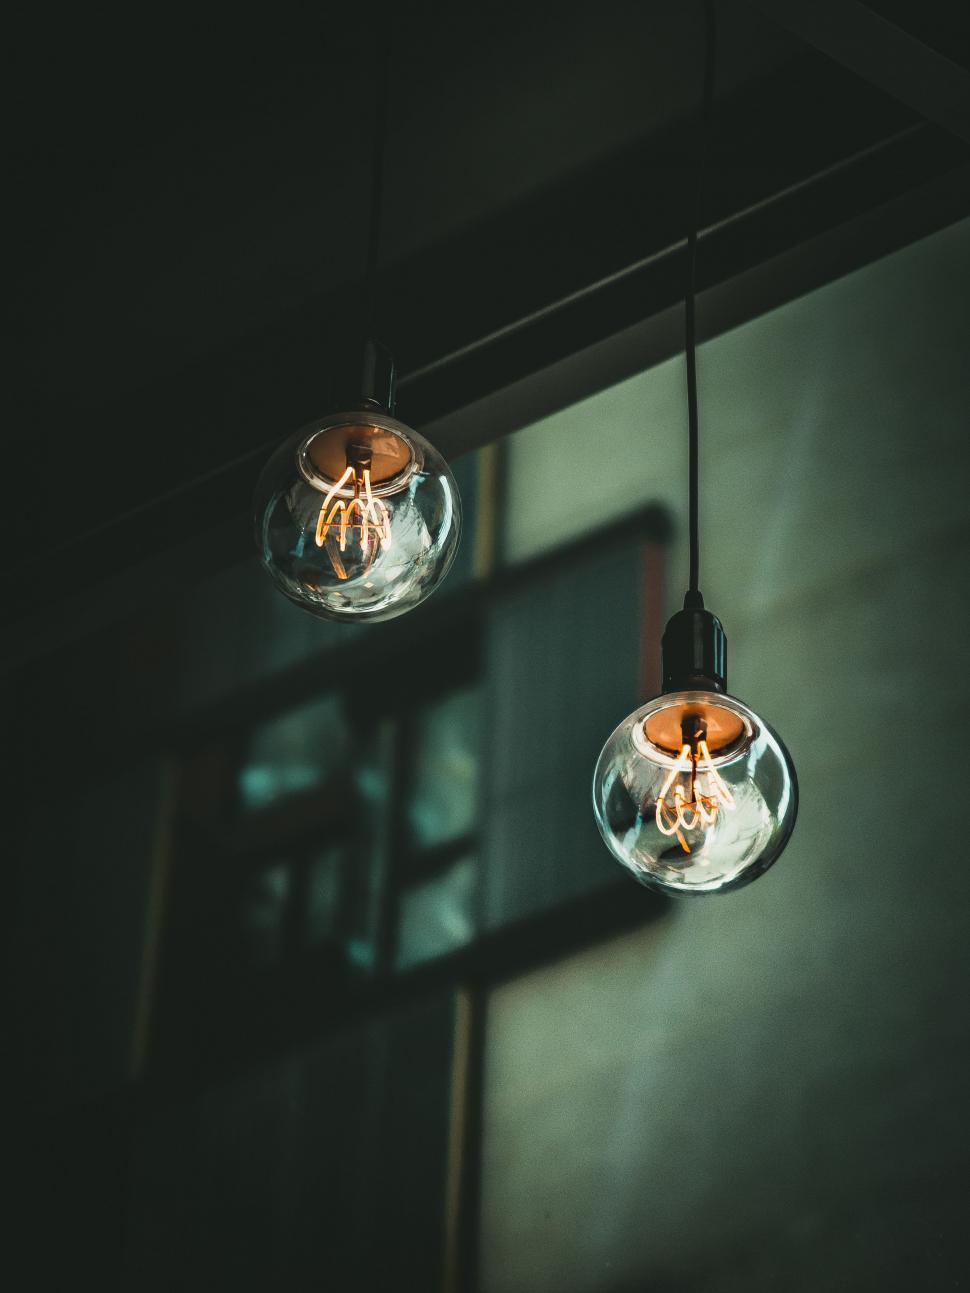 Free Image of Hanging Lights From Ceiling 